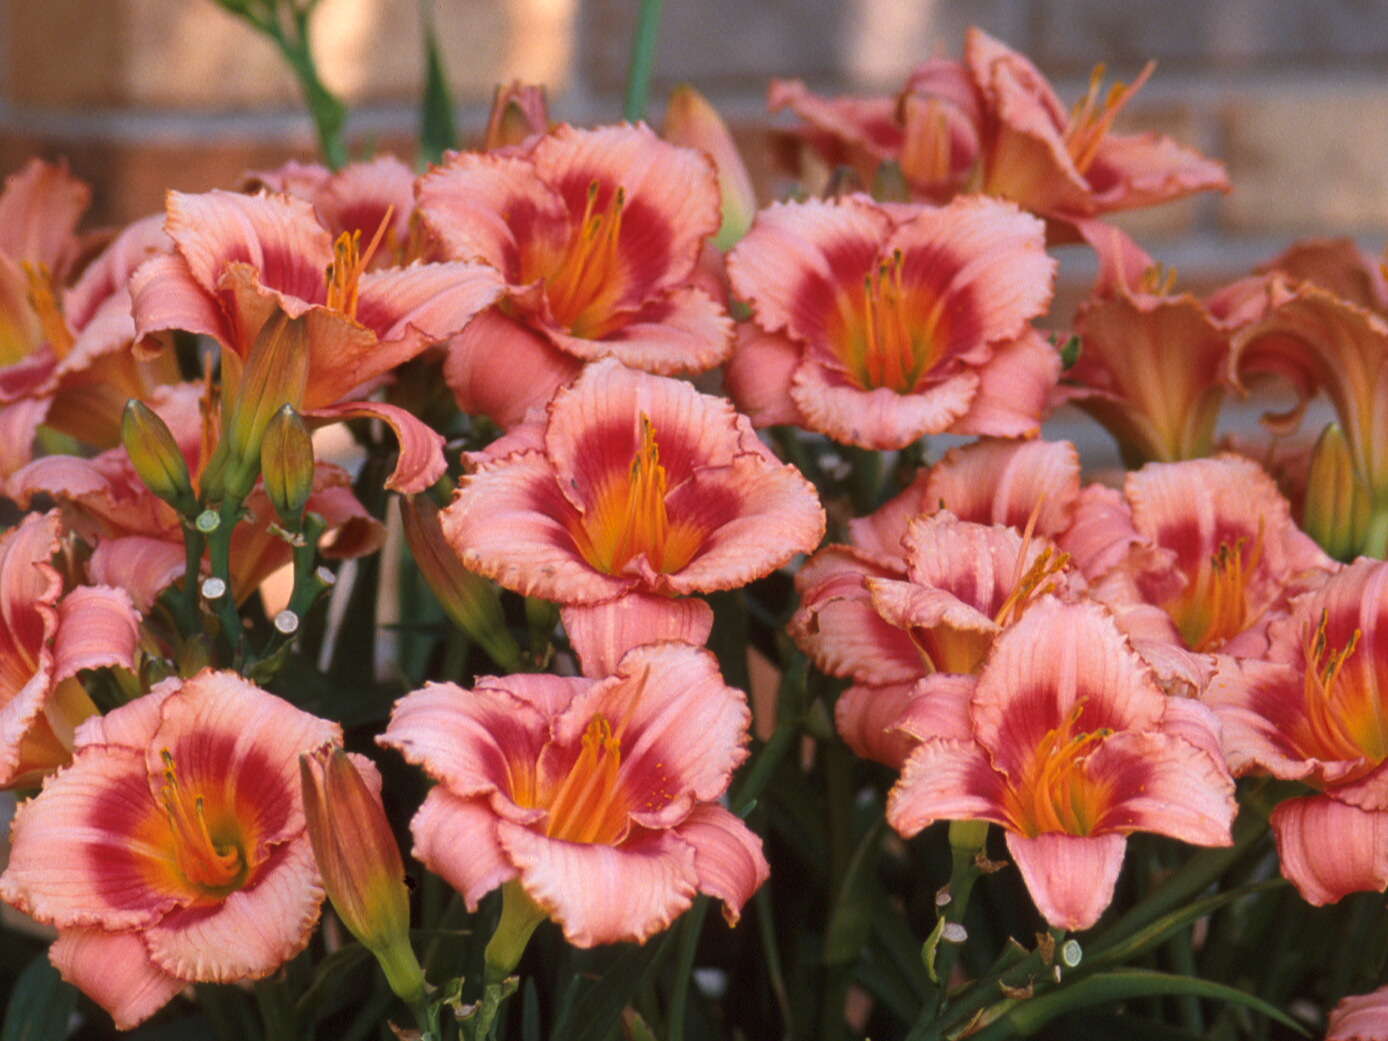 How to Force Daylilies for Spring Retail Sales